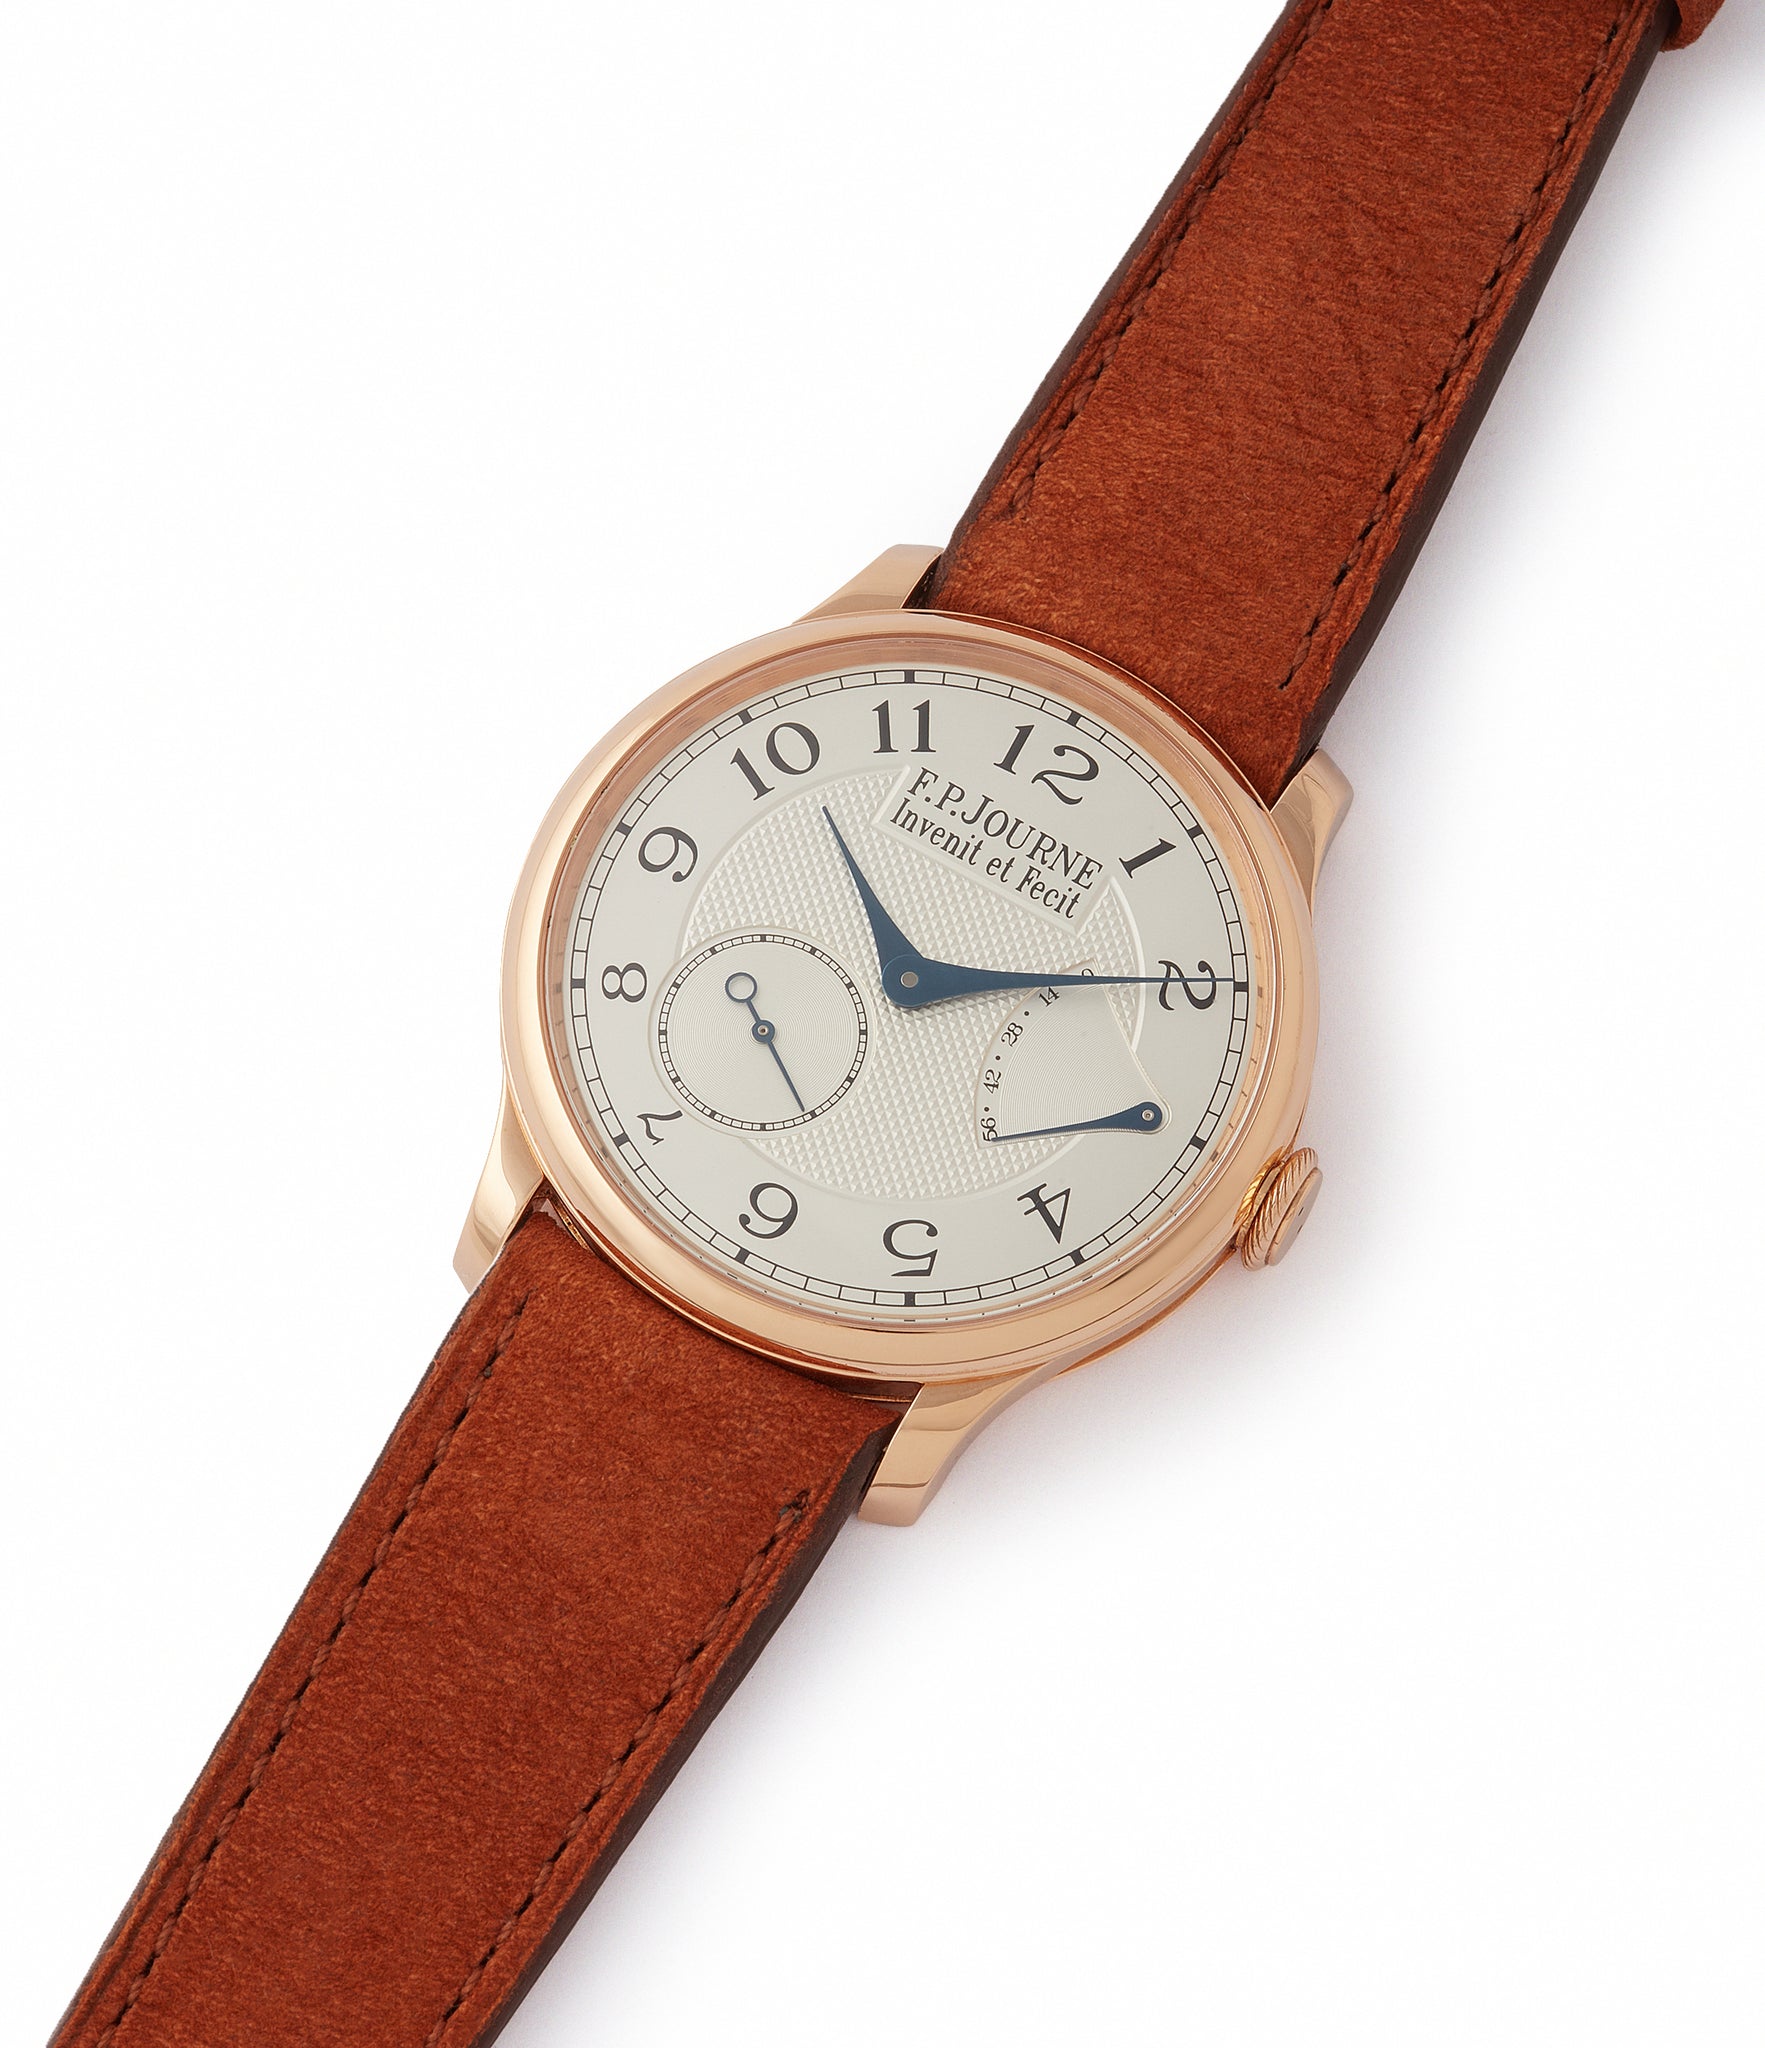 shop F. P. Journe Chronometre Souverain CS.RG.38 rose gold silver dial watch for sale online at A Collected Man London UK specialist of rare watches